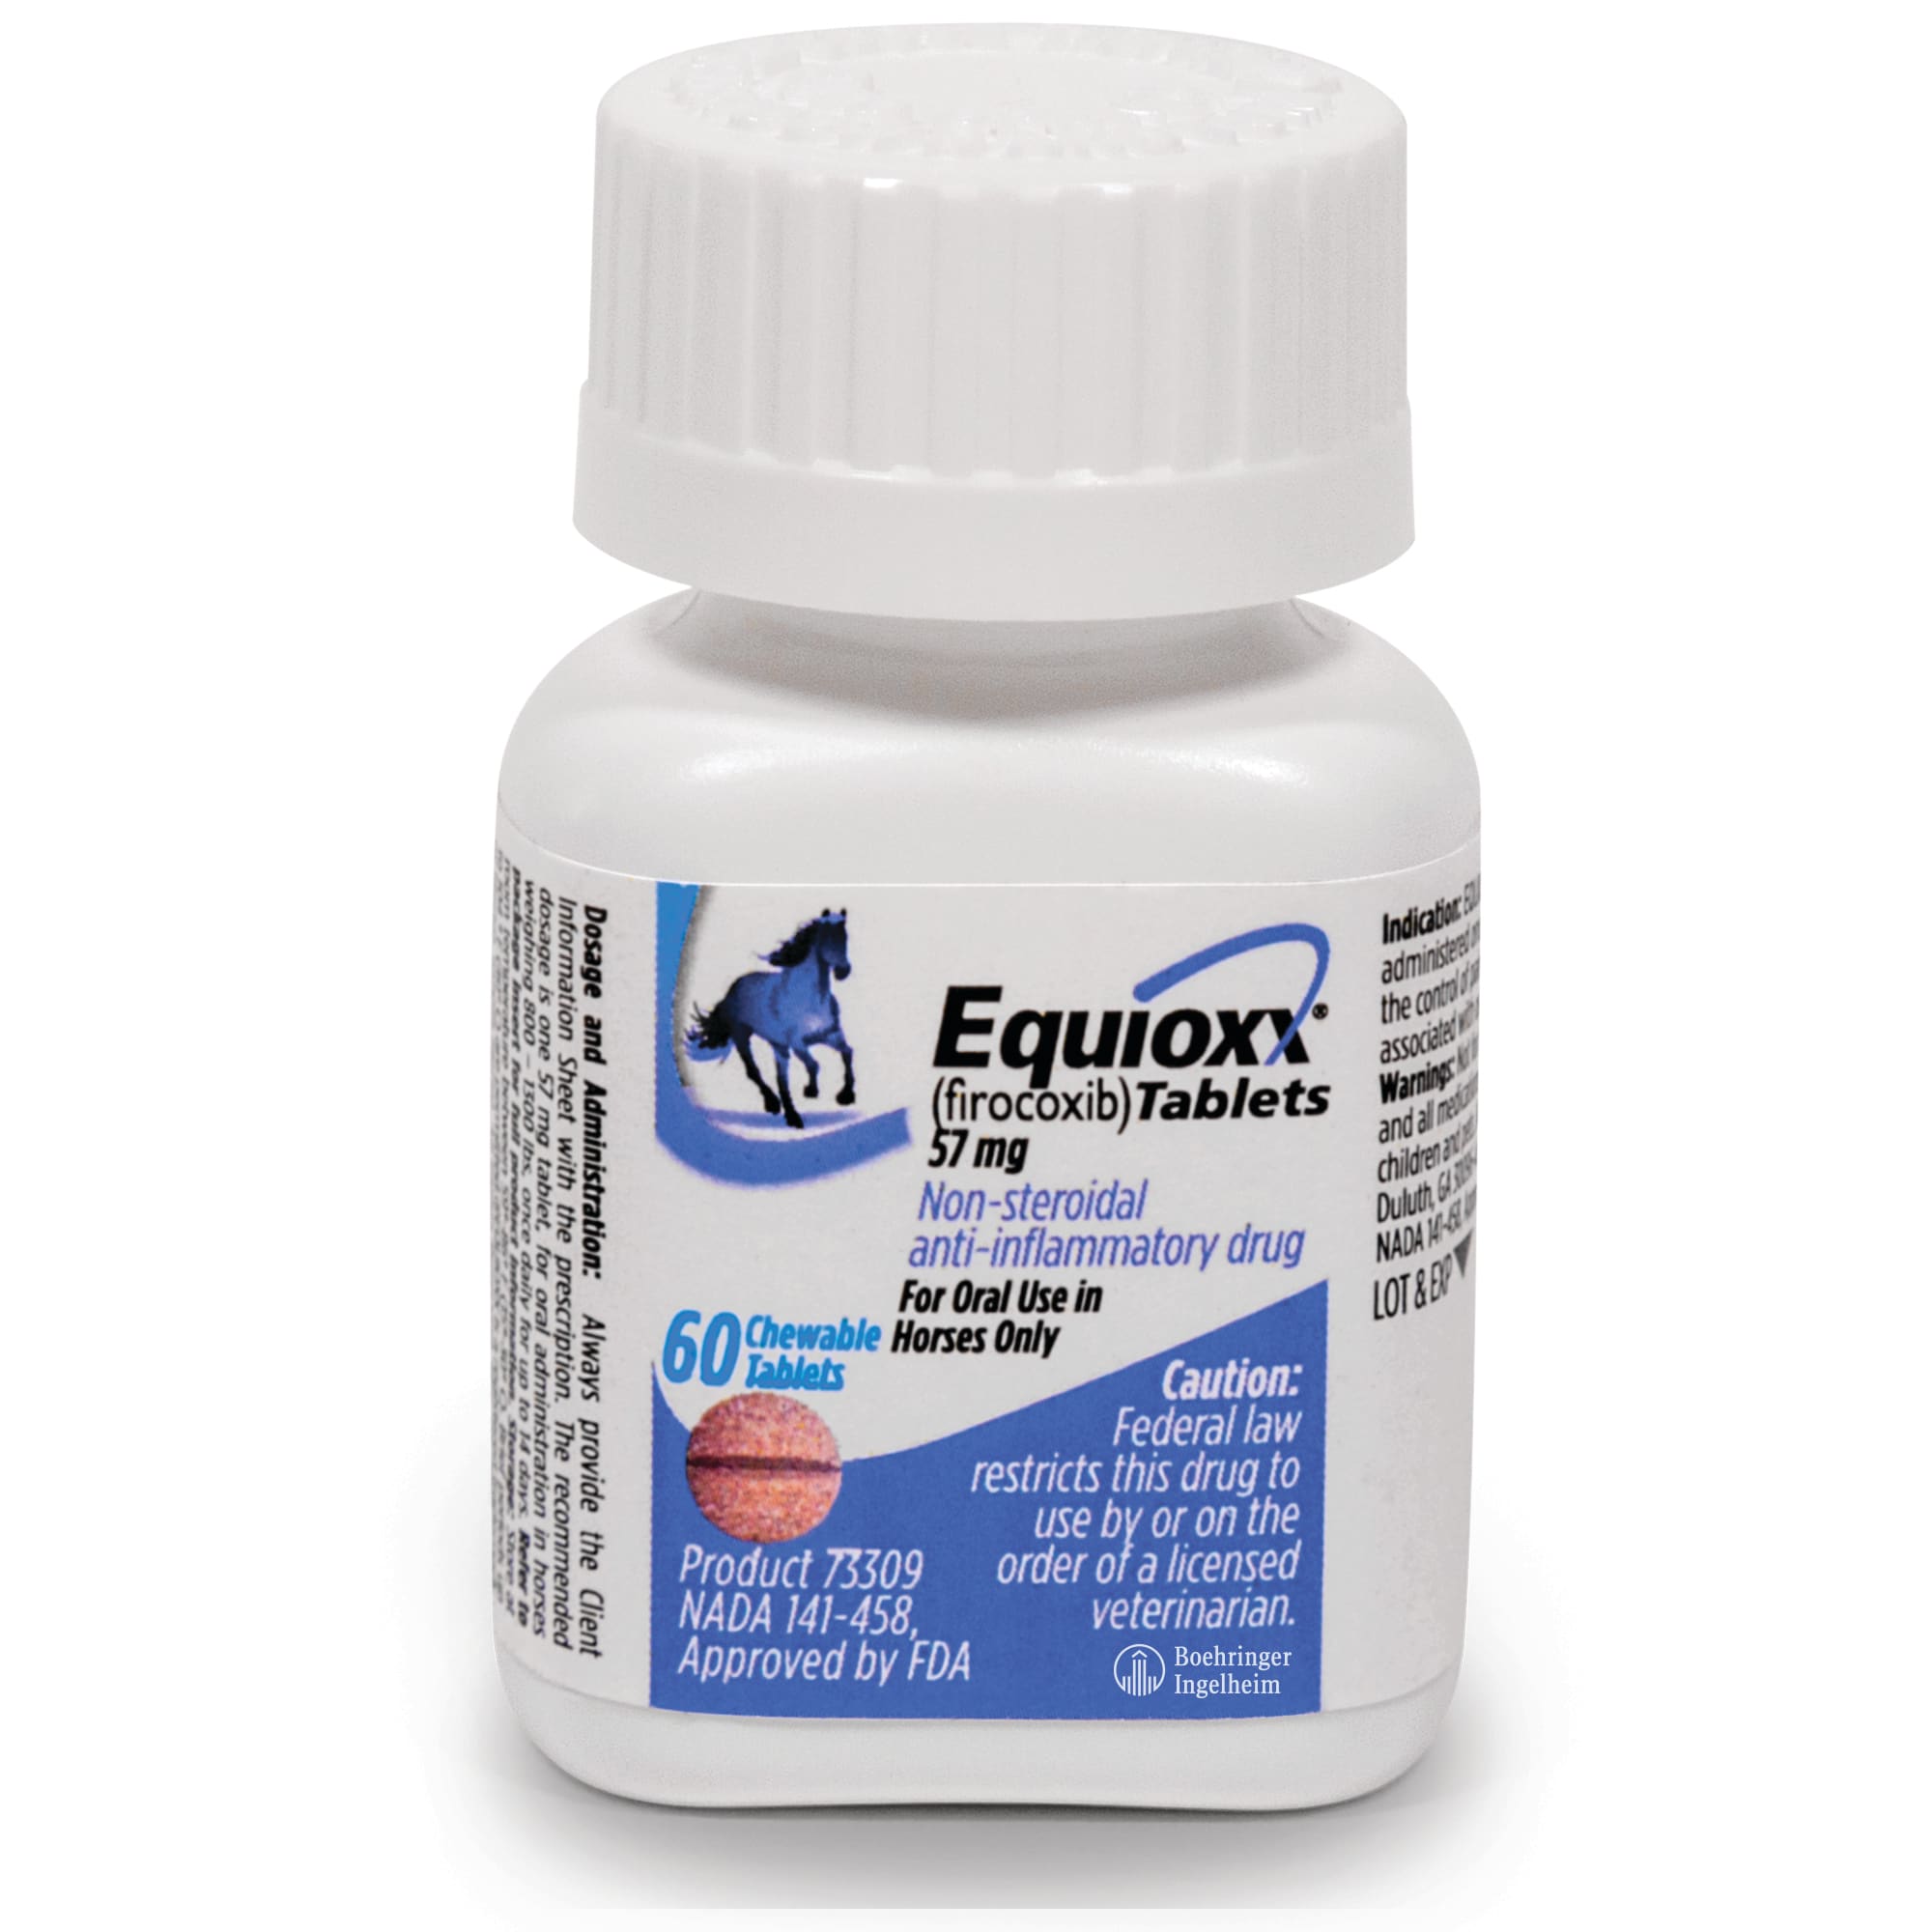 equioxx-tablets-57-mg-60-count-petco